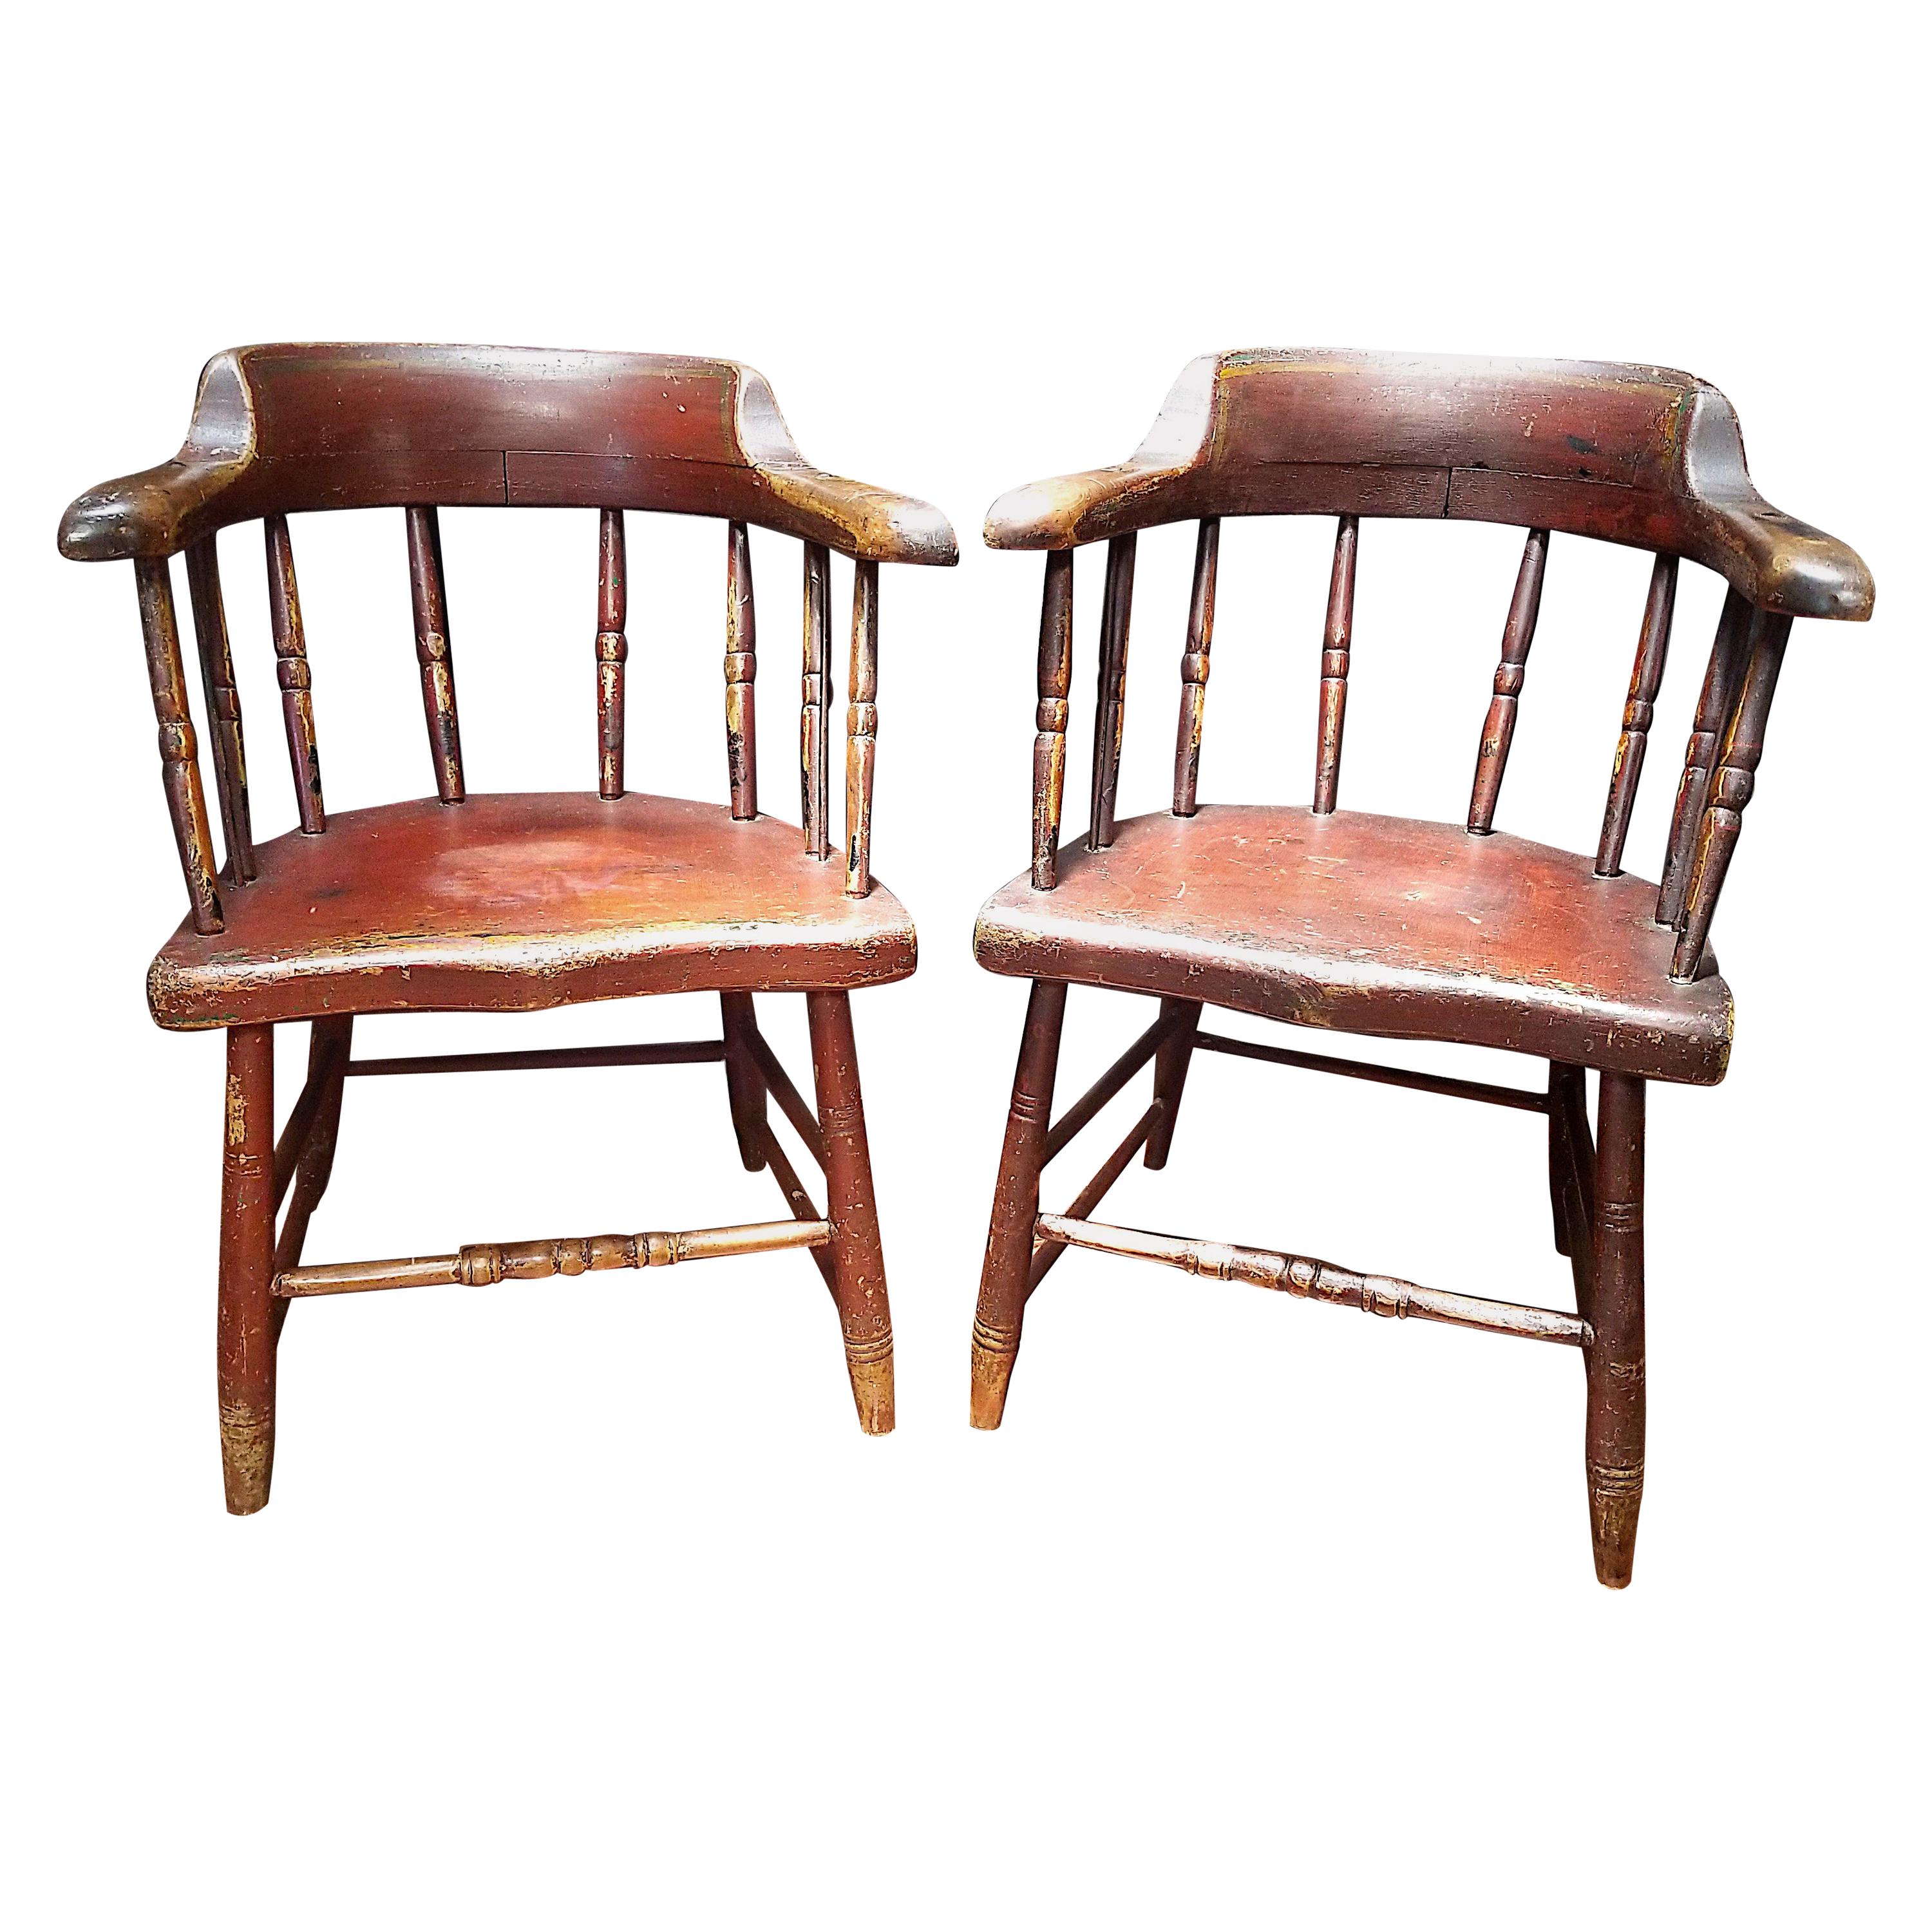 Pair of New England Painted Windsor Chairs